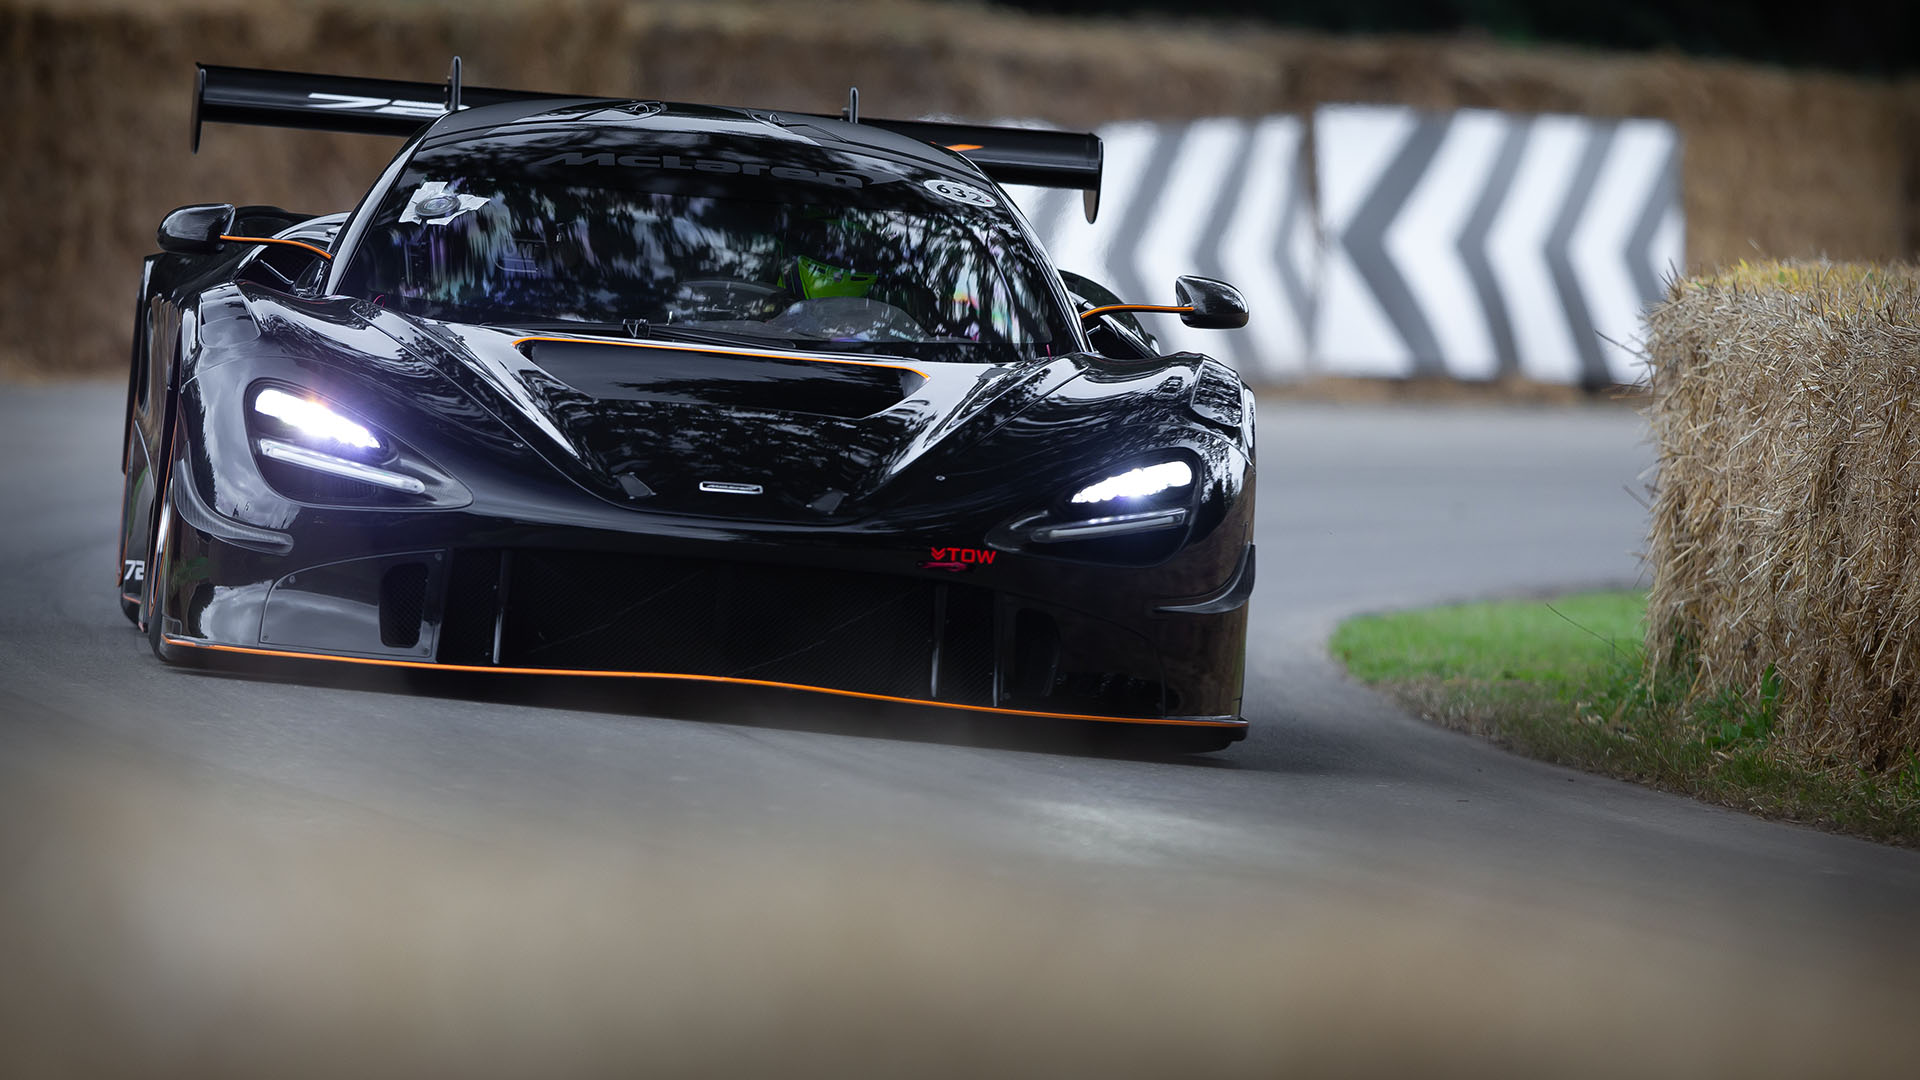 mclaren-720s-GT3x-takes-victory-at-FoS-1.jpg